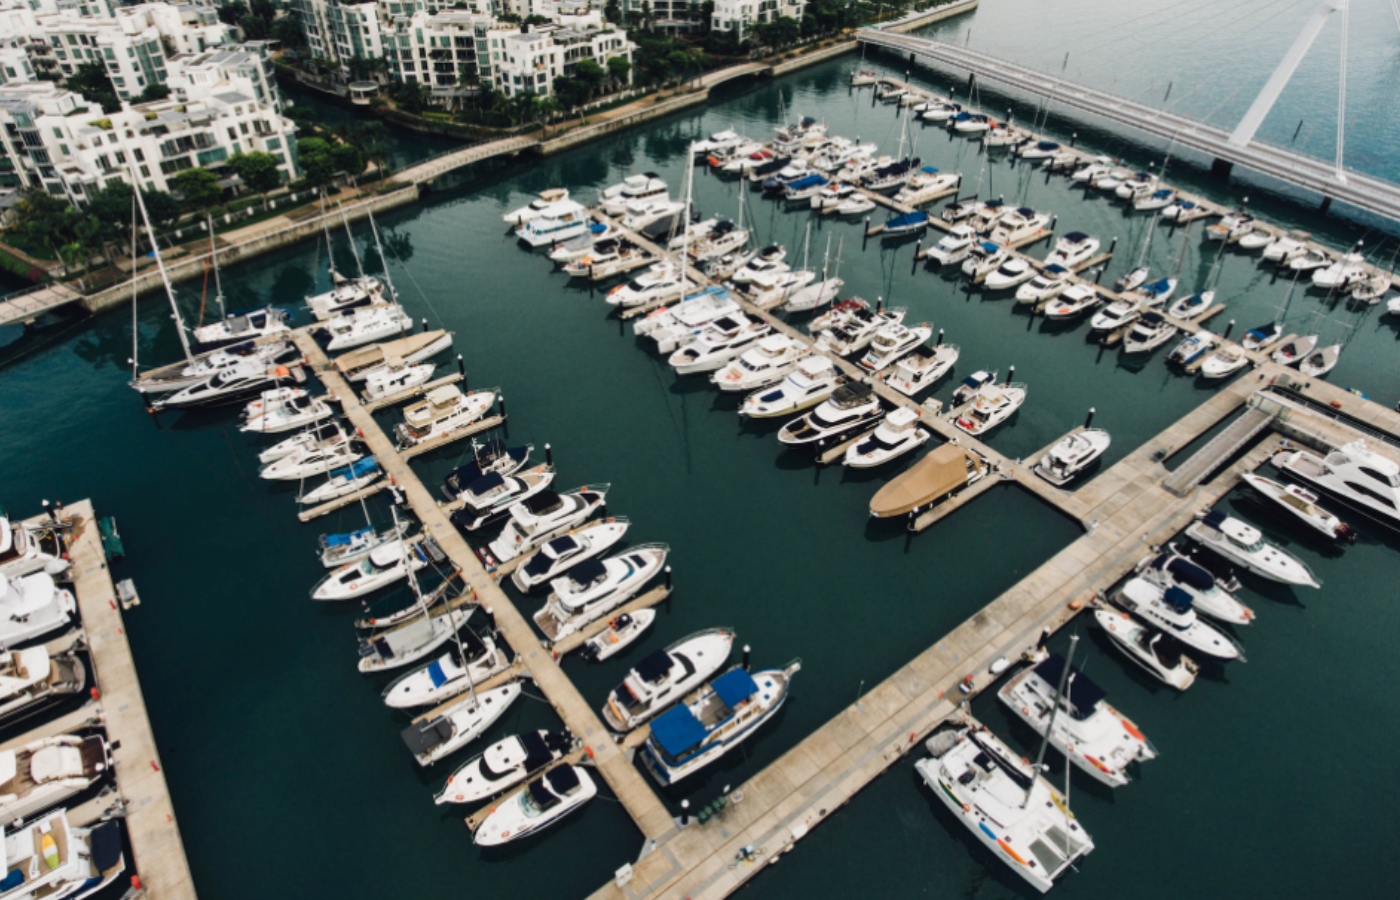 Denison Yachting Published Q3 Market Report [In the News]